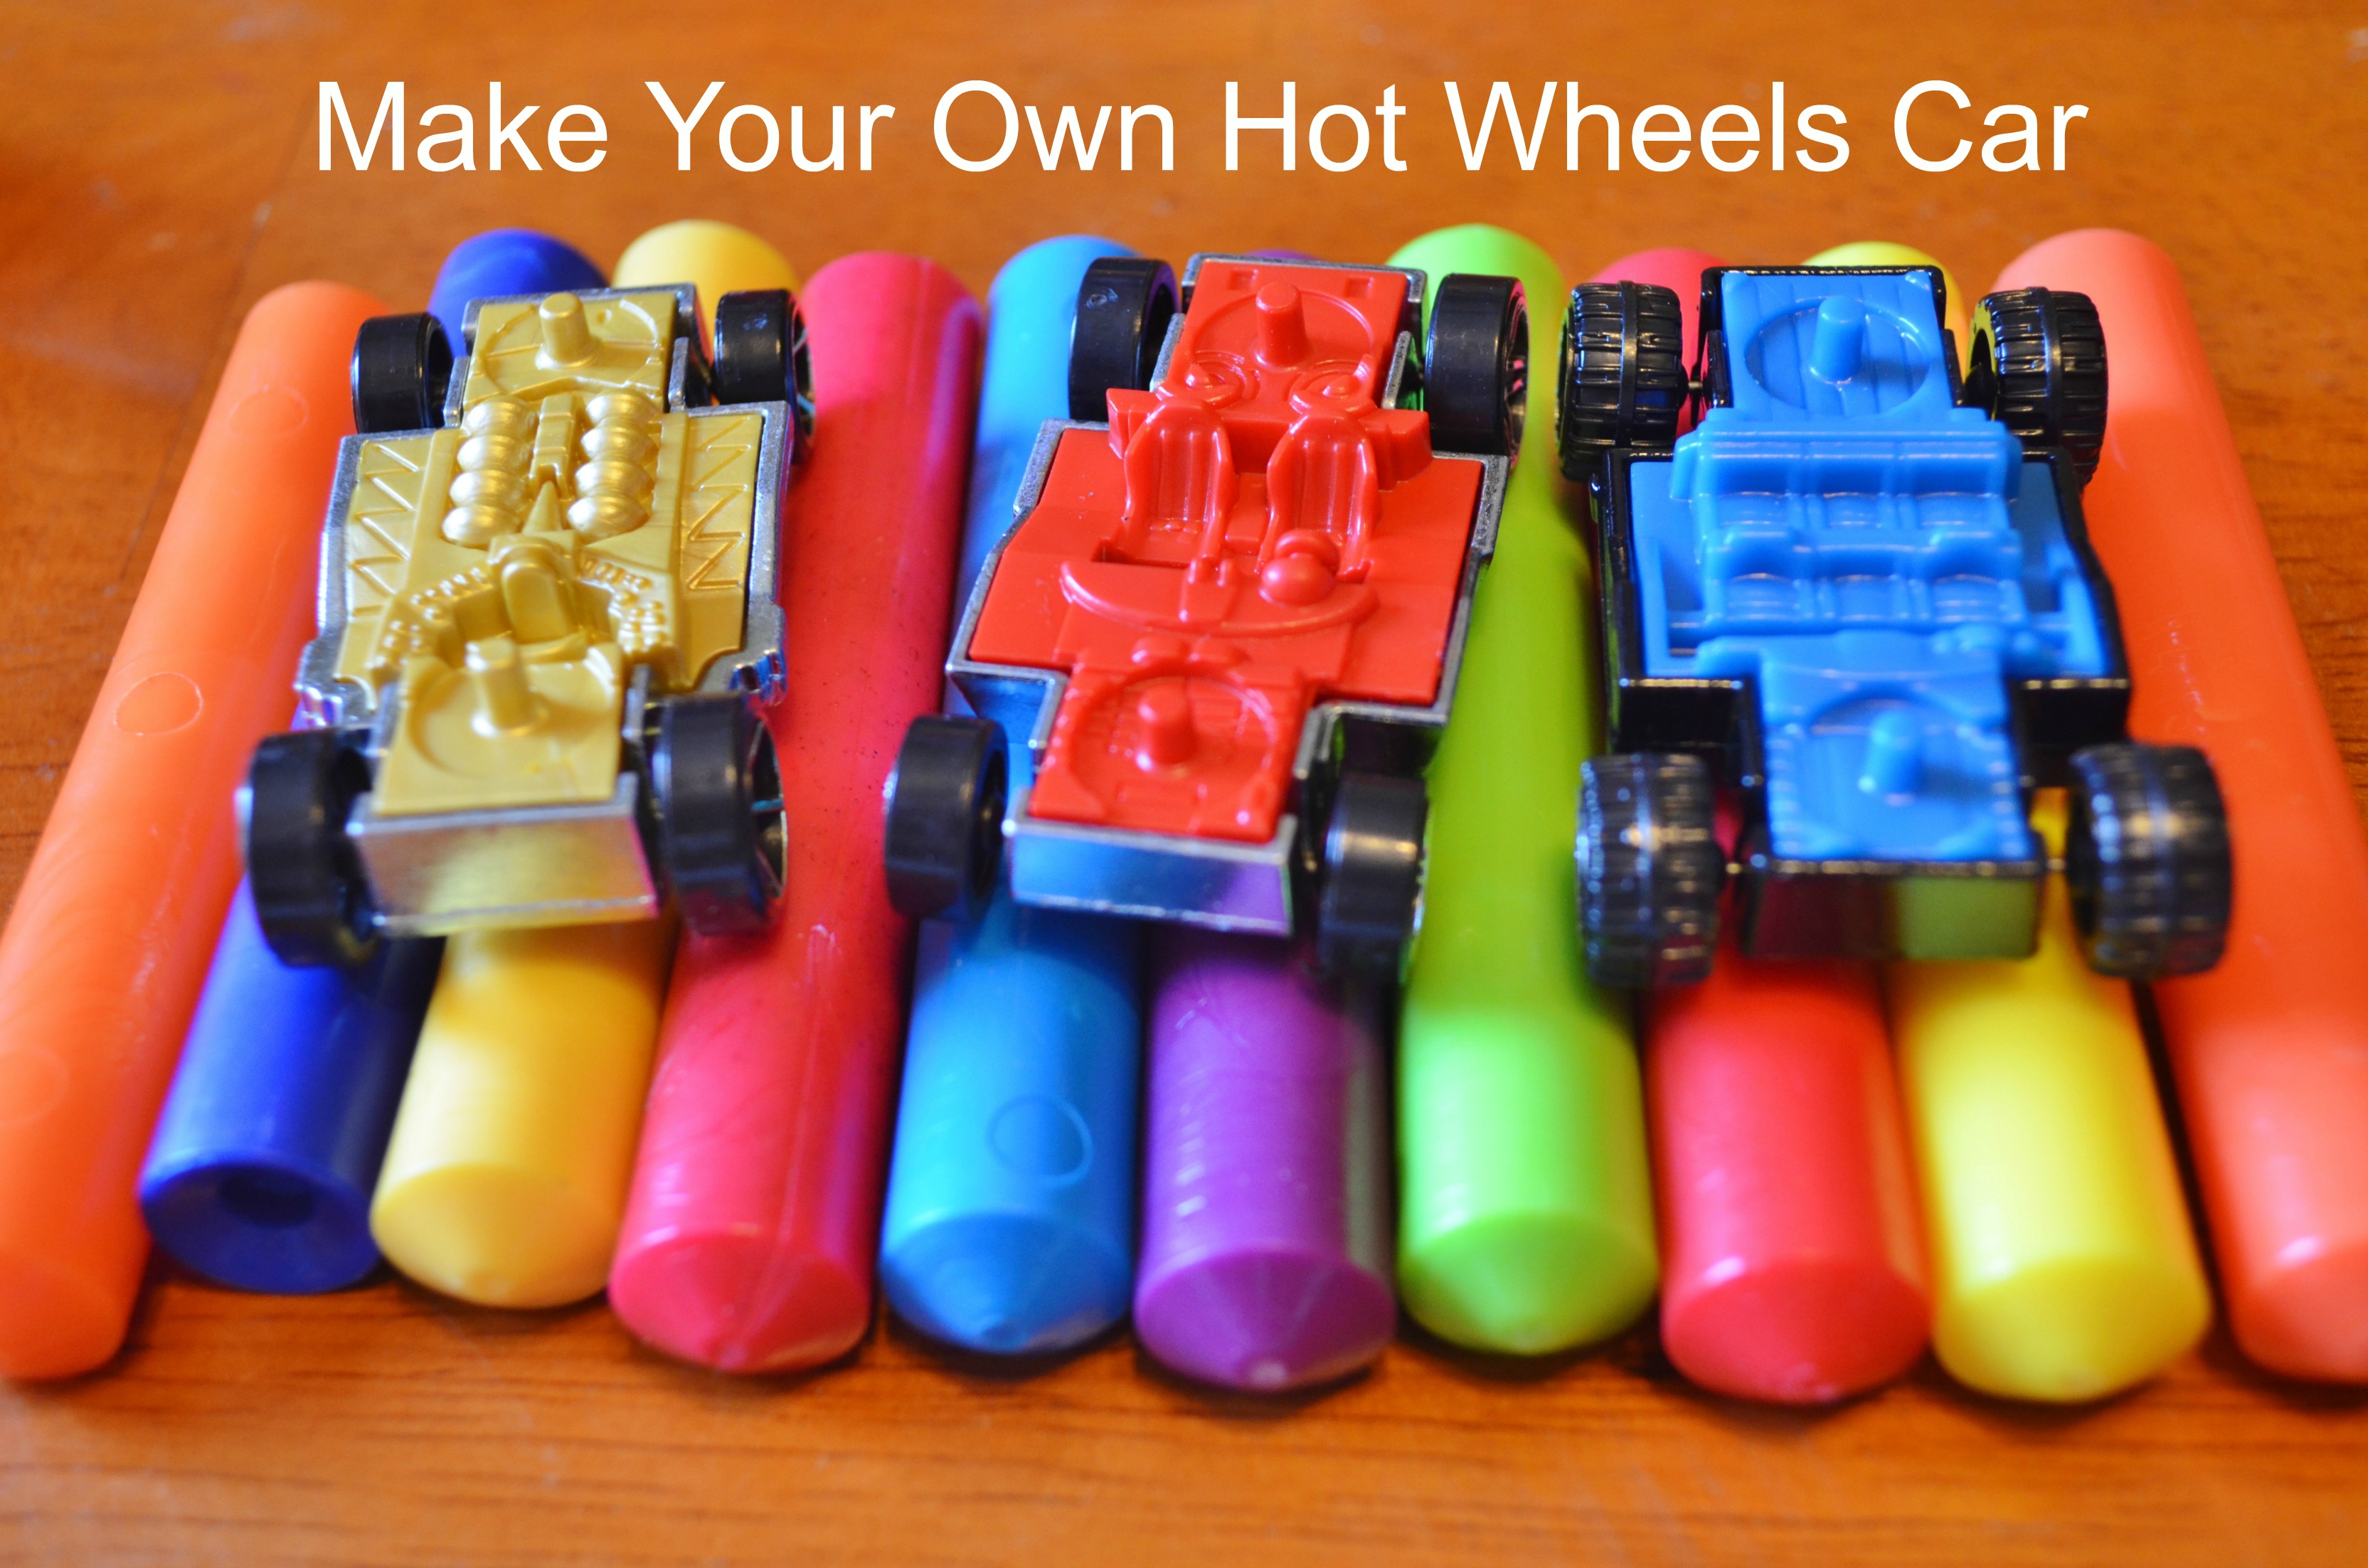 hot wheels make your own